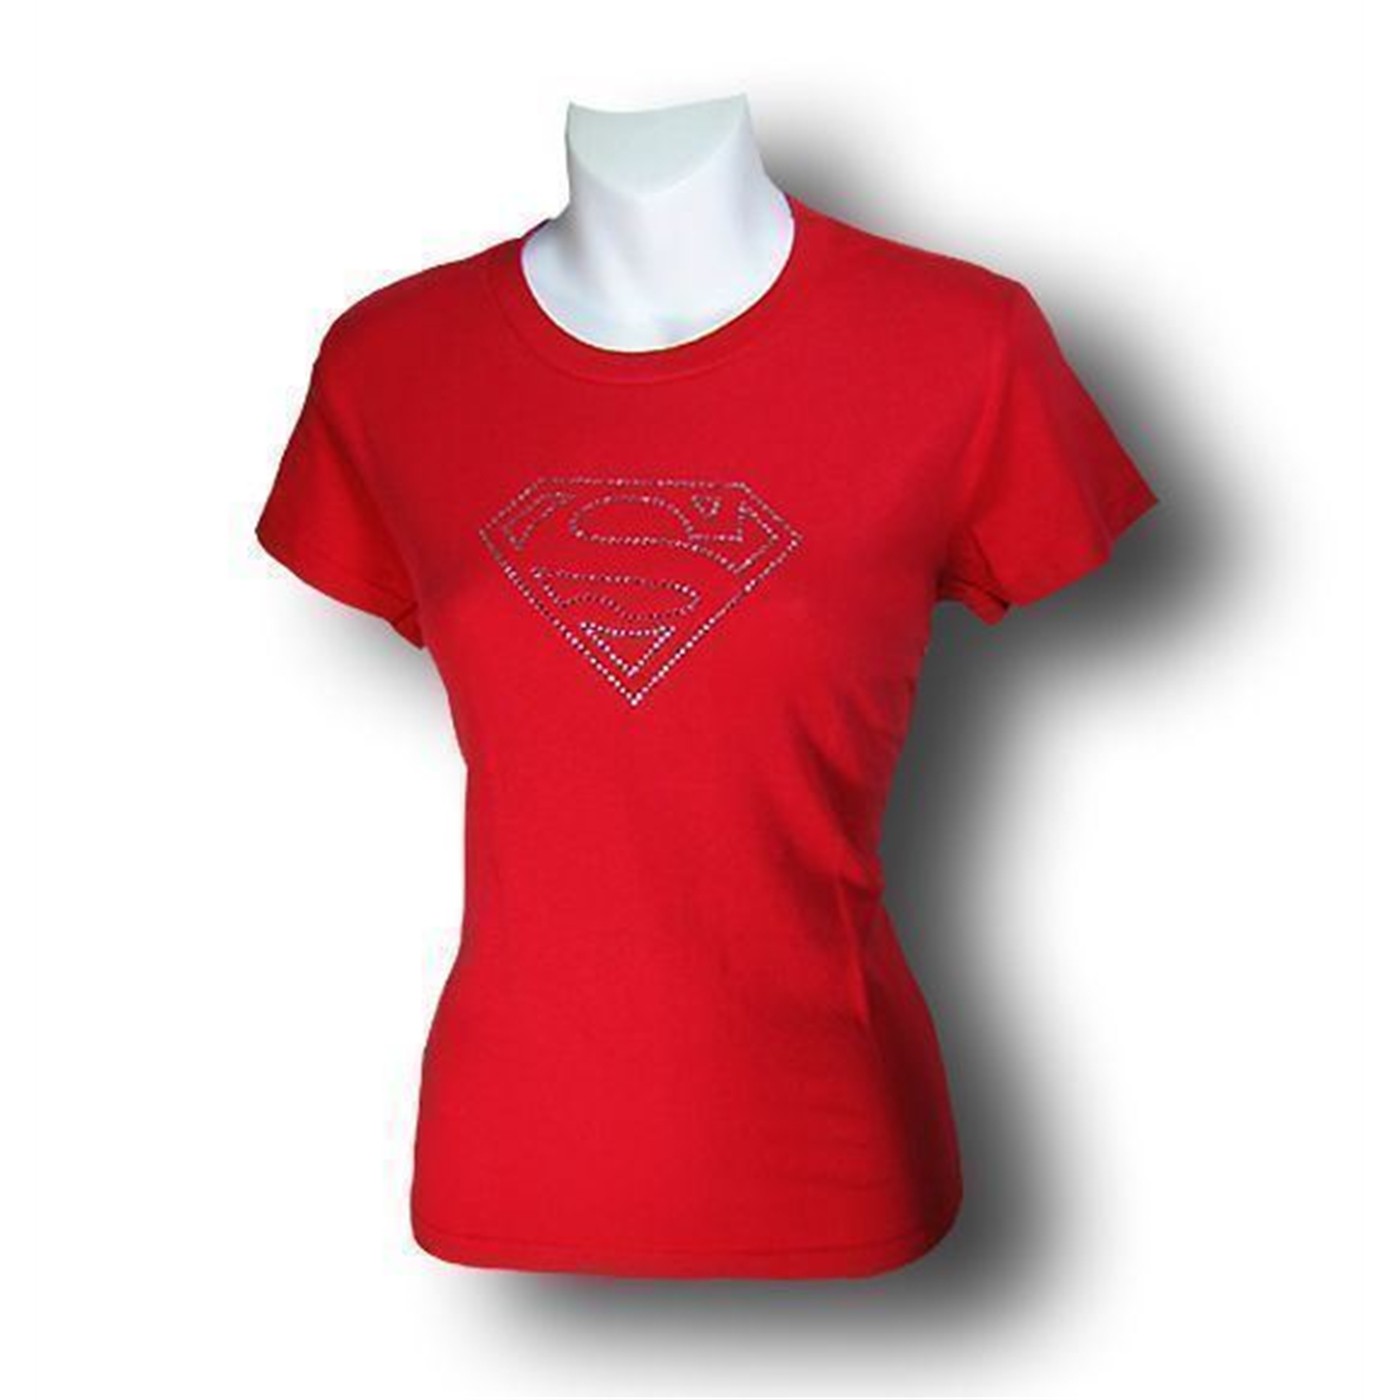 Supergirl Crystal Studded Red T-Shirt